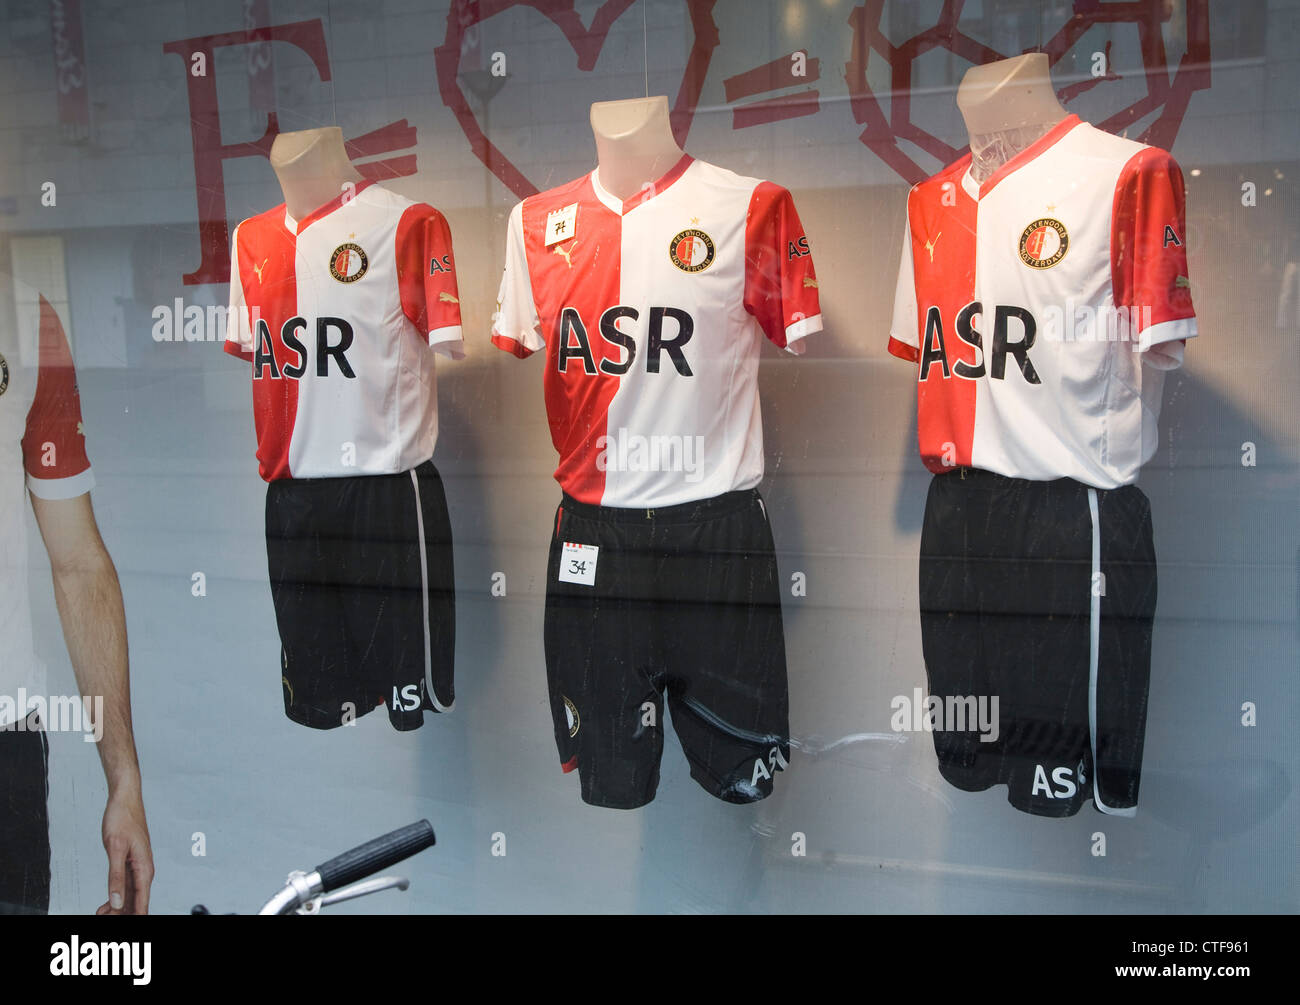 zwavel melodie Aanbeveling Replica football shirts of Feyenoord FC on display in shop window,  Rotterdam, Netherlands Stock Photo - Alamy